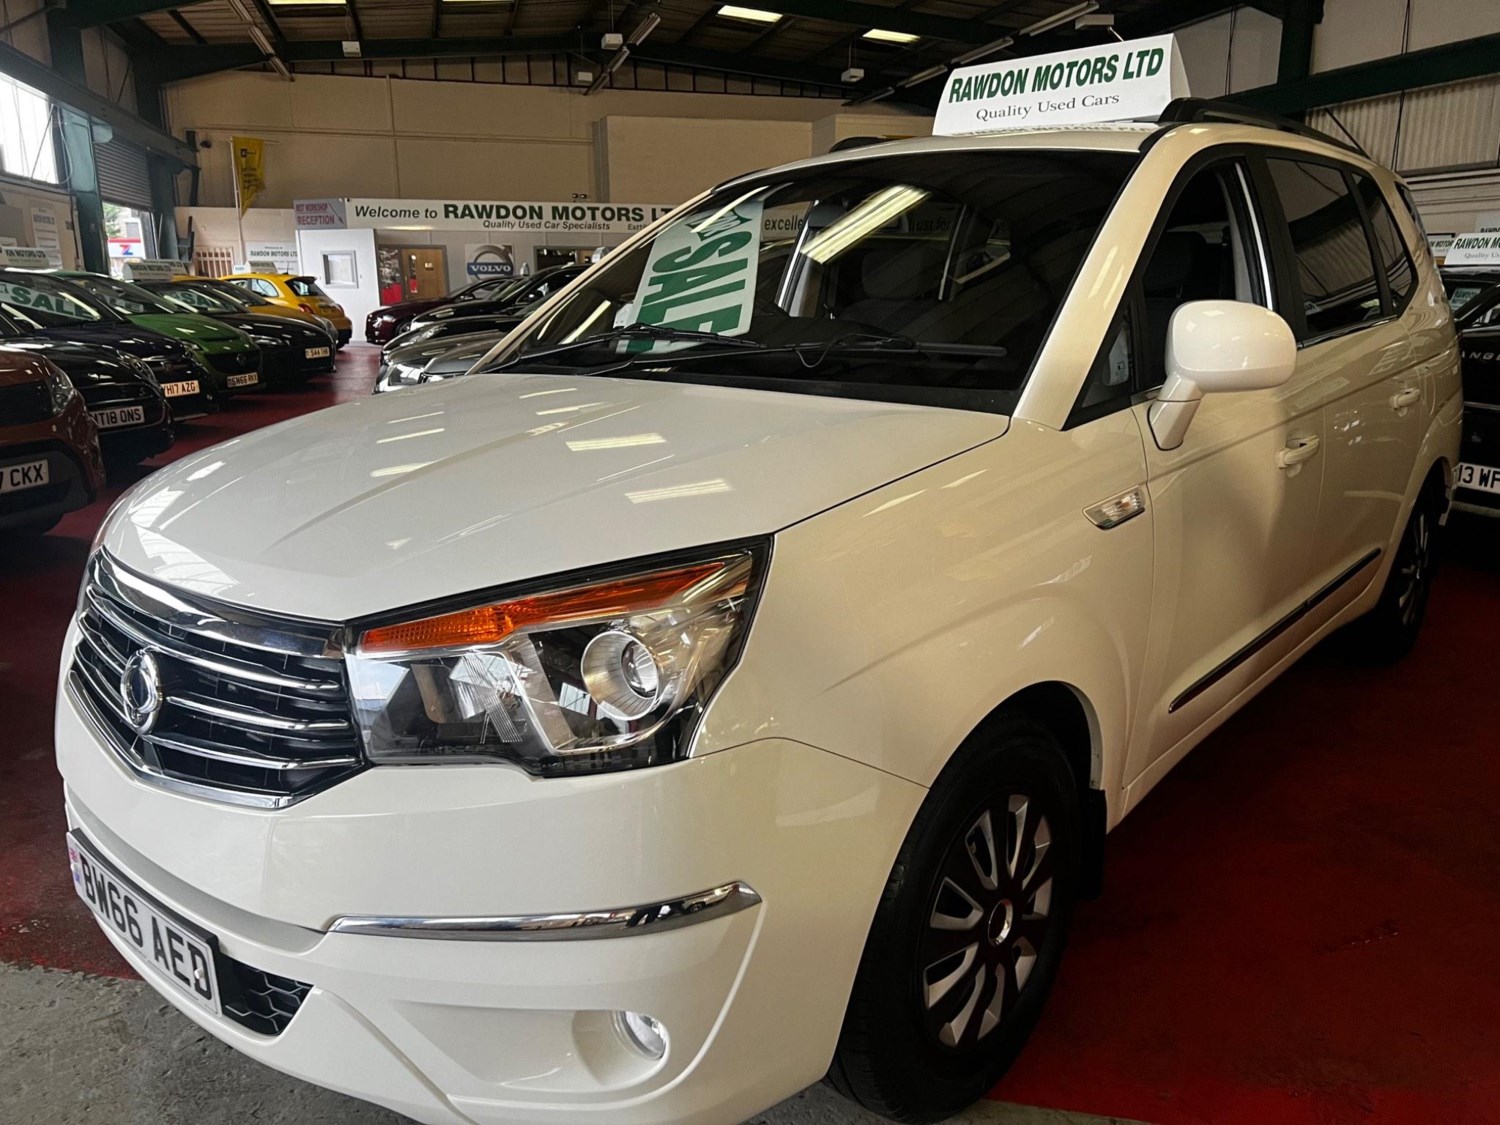 SsangYong Turismo Listing Image